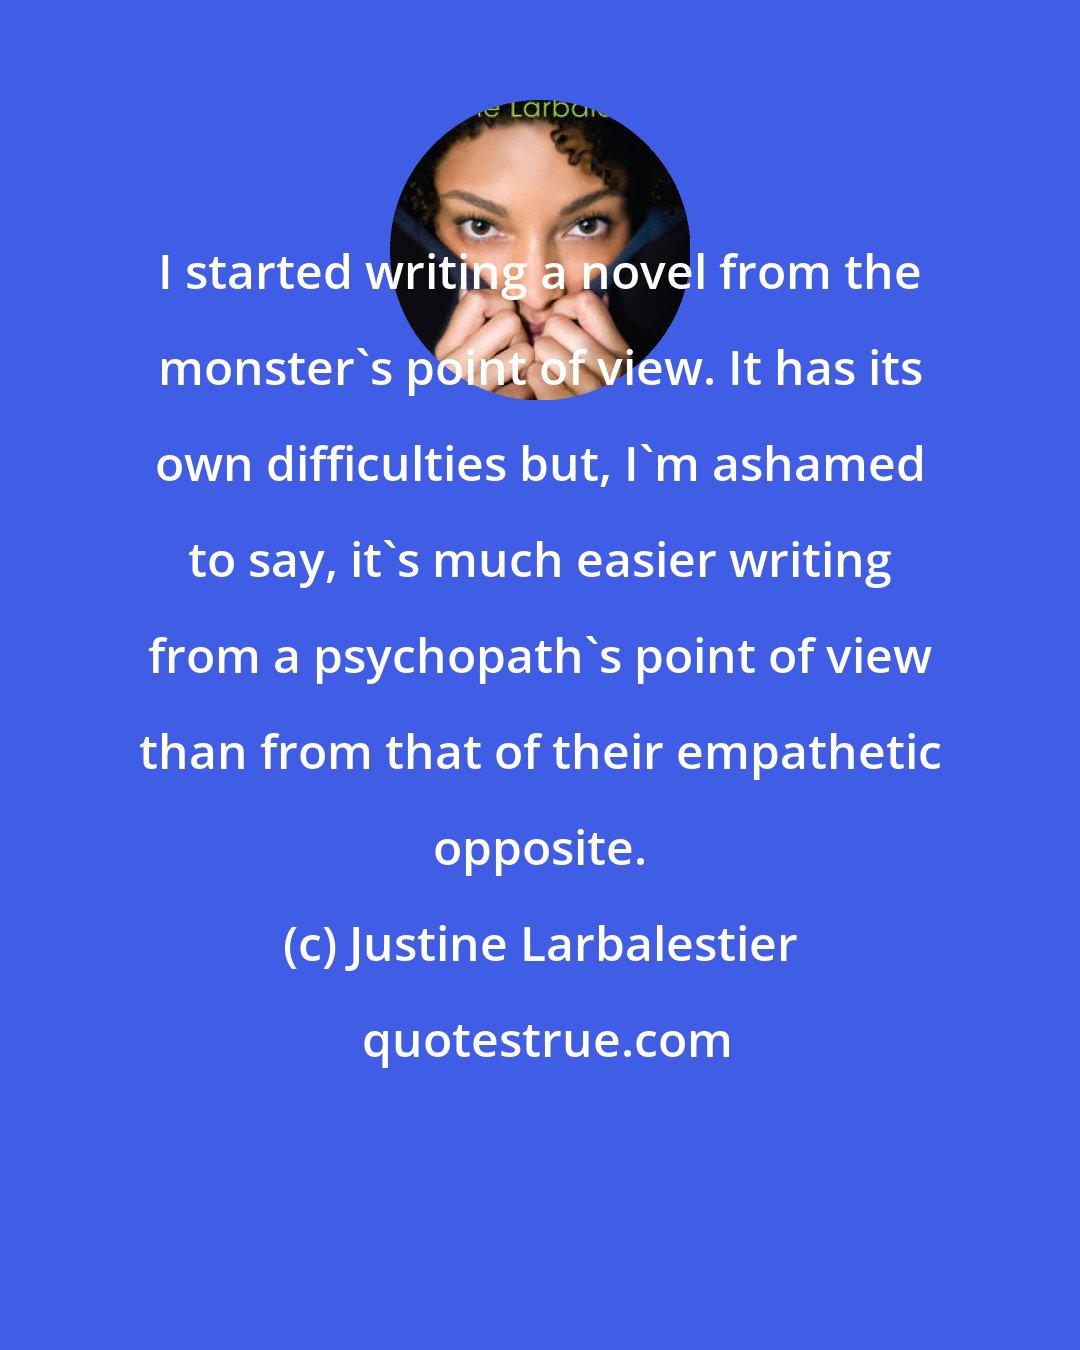 Justine Larbalestier: I started writing a novel from the monster's point of view. It has its own difficulties but, I'm ashamed to say, it's much easier writing from a psychopath's point of view than from that of their empathetic opposite.